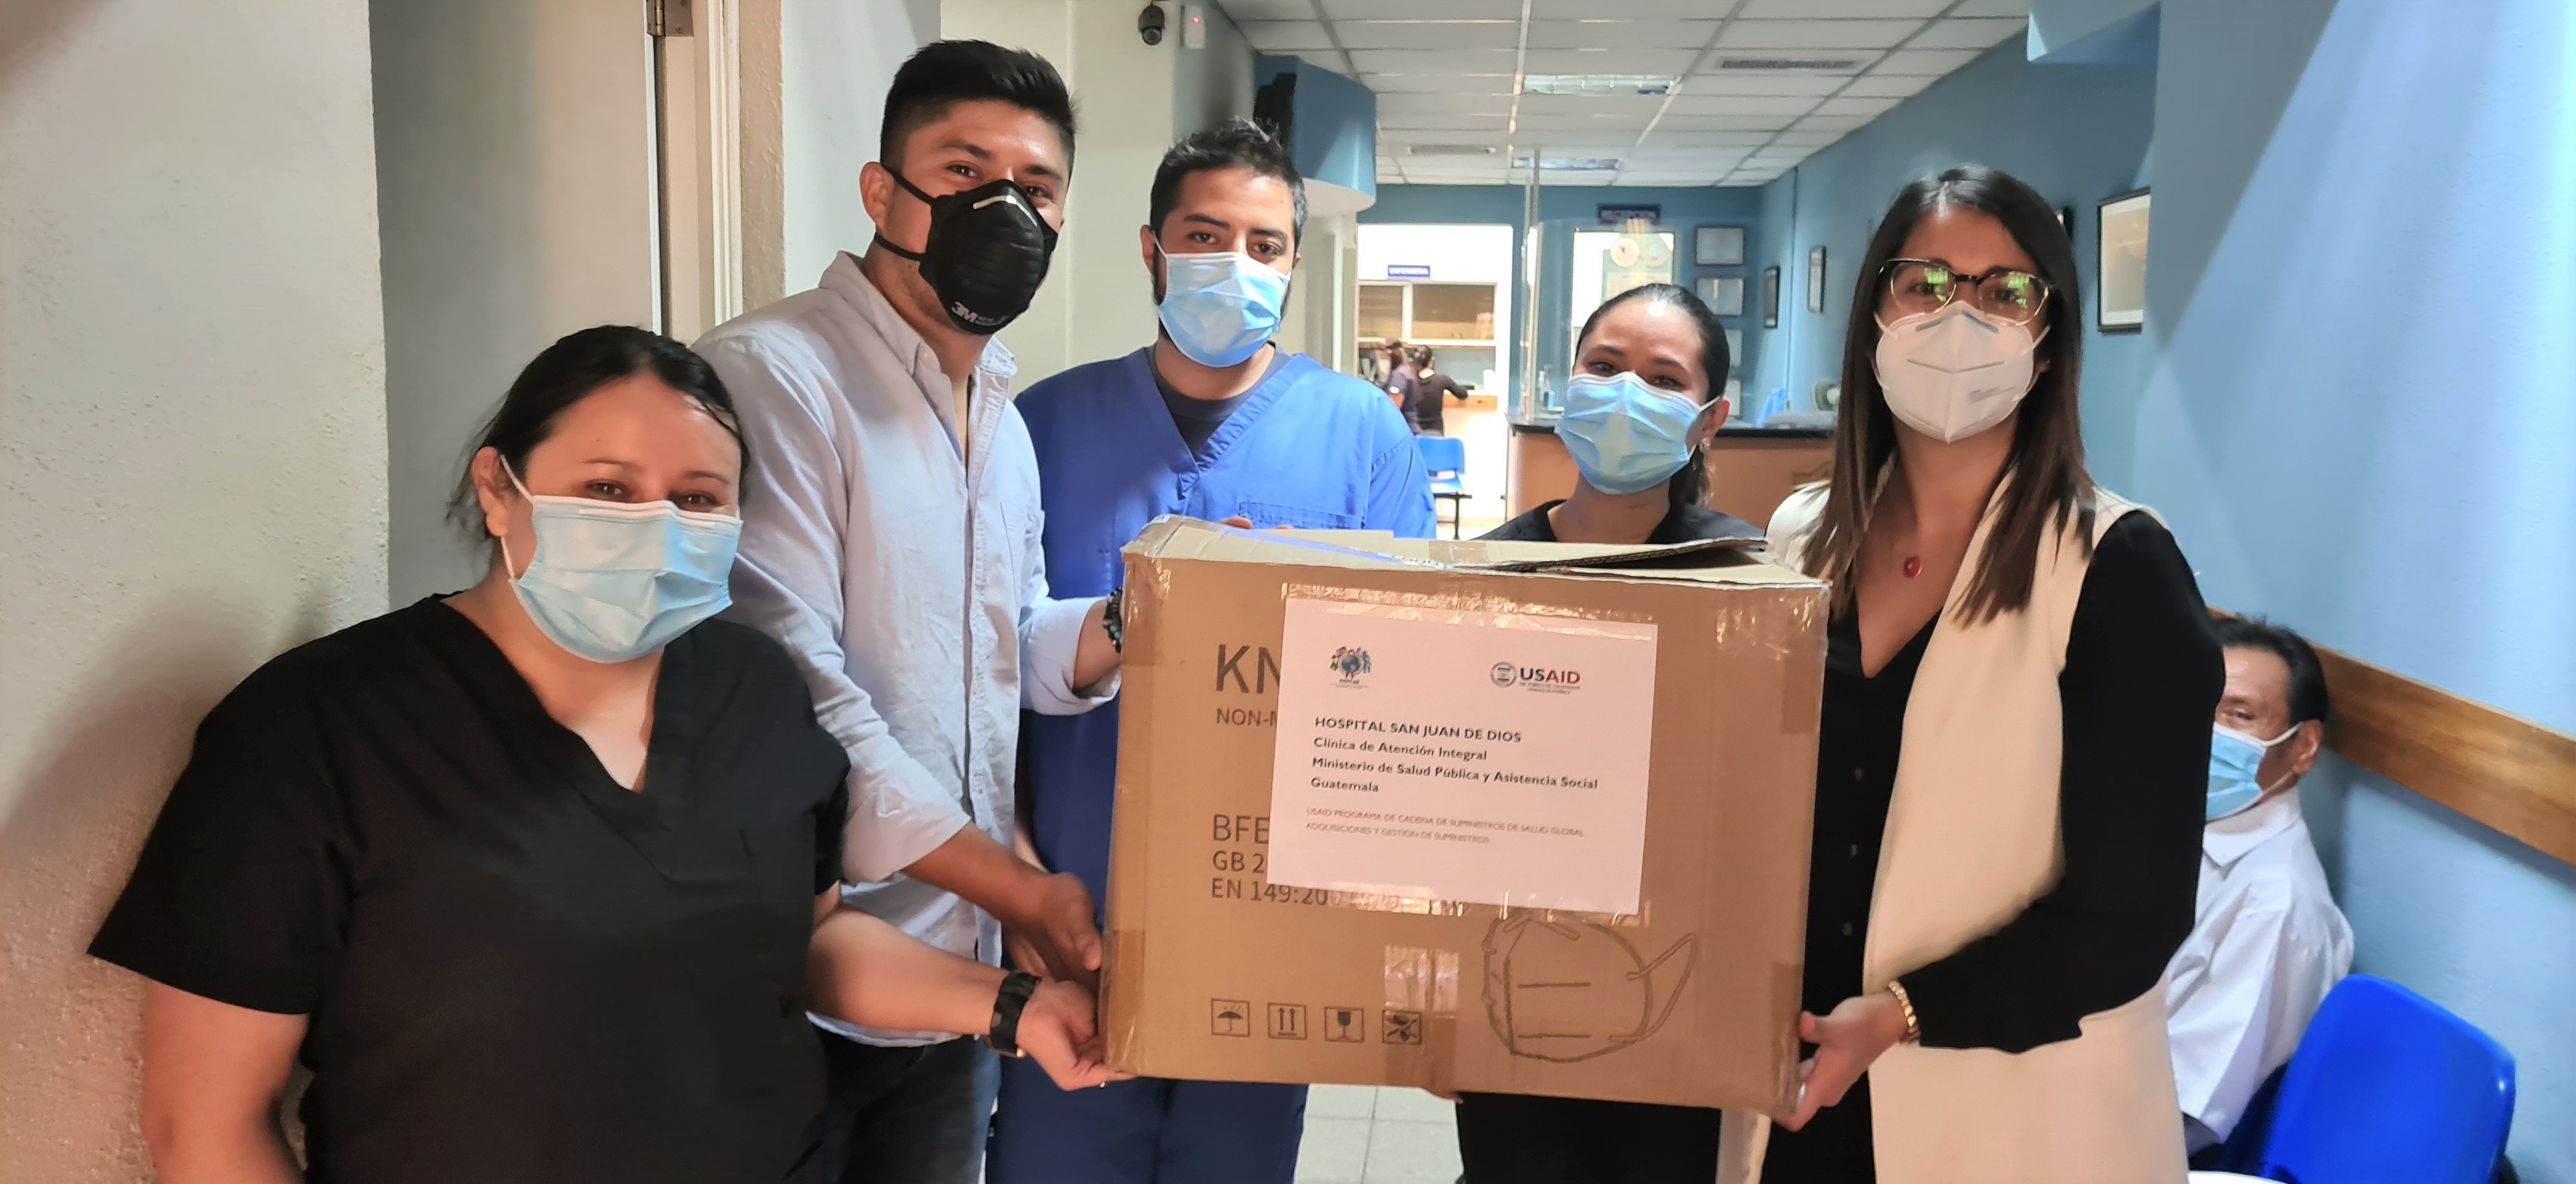 Delivering PPE to combat COVID in Honduras